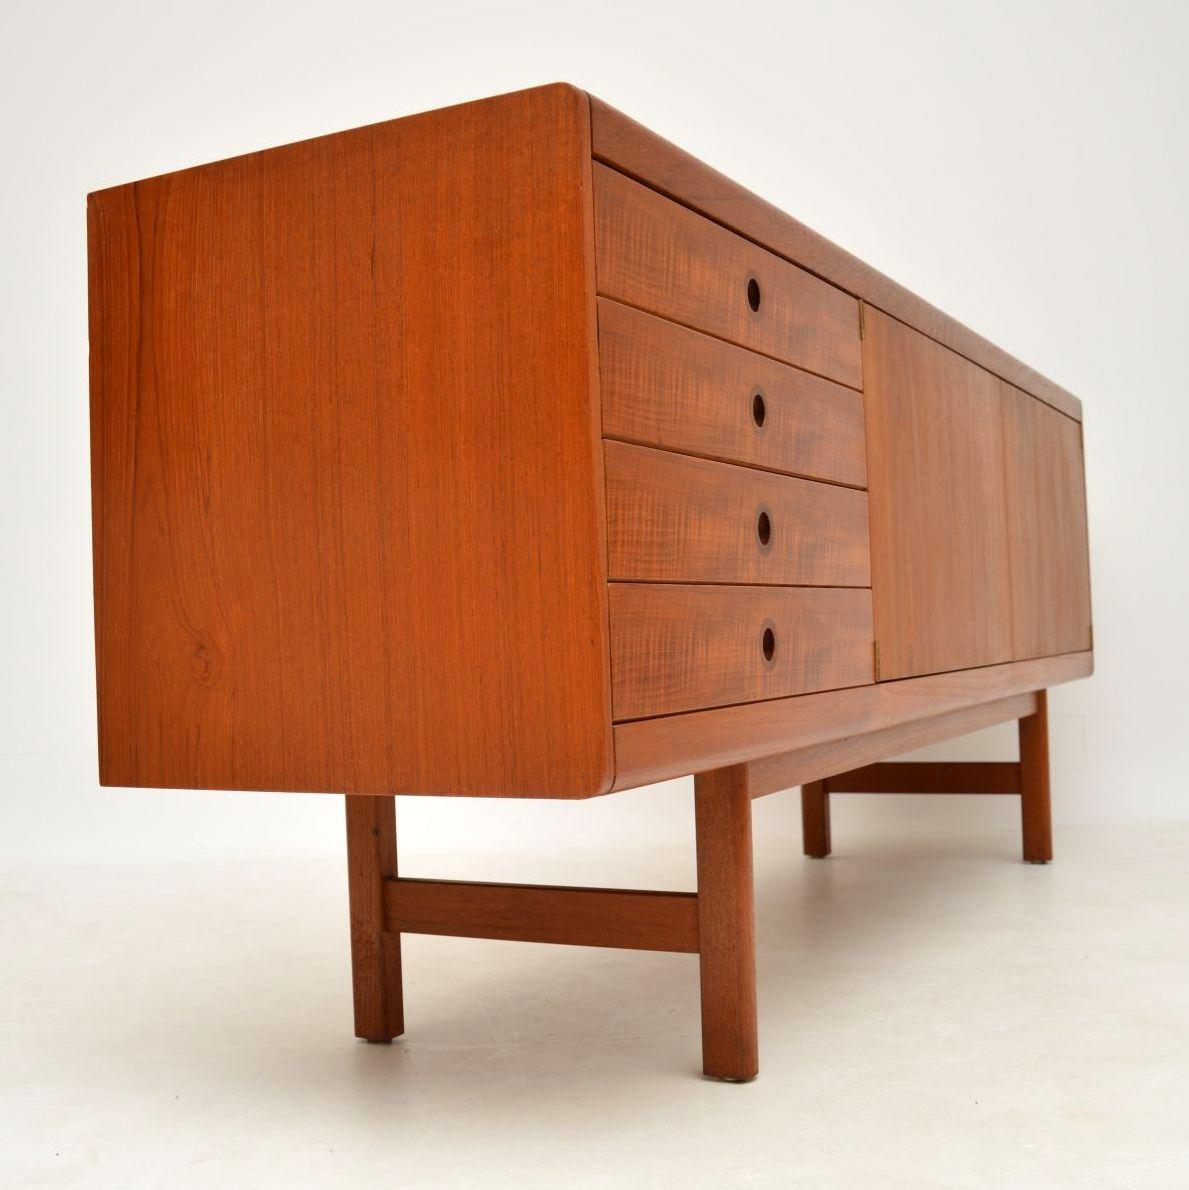 English 1960s Vintage Teak Sideboard by Robert Heritage for Archie Shine